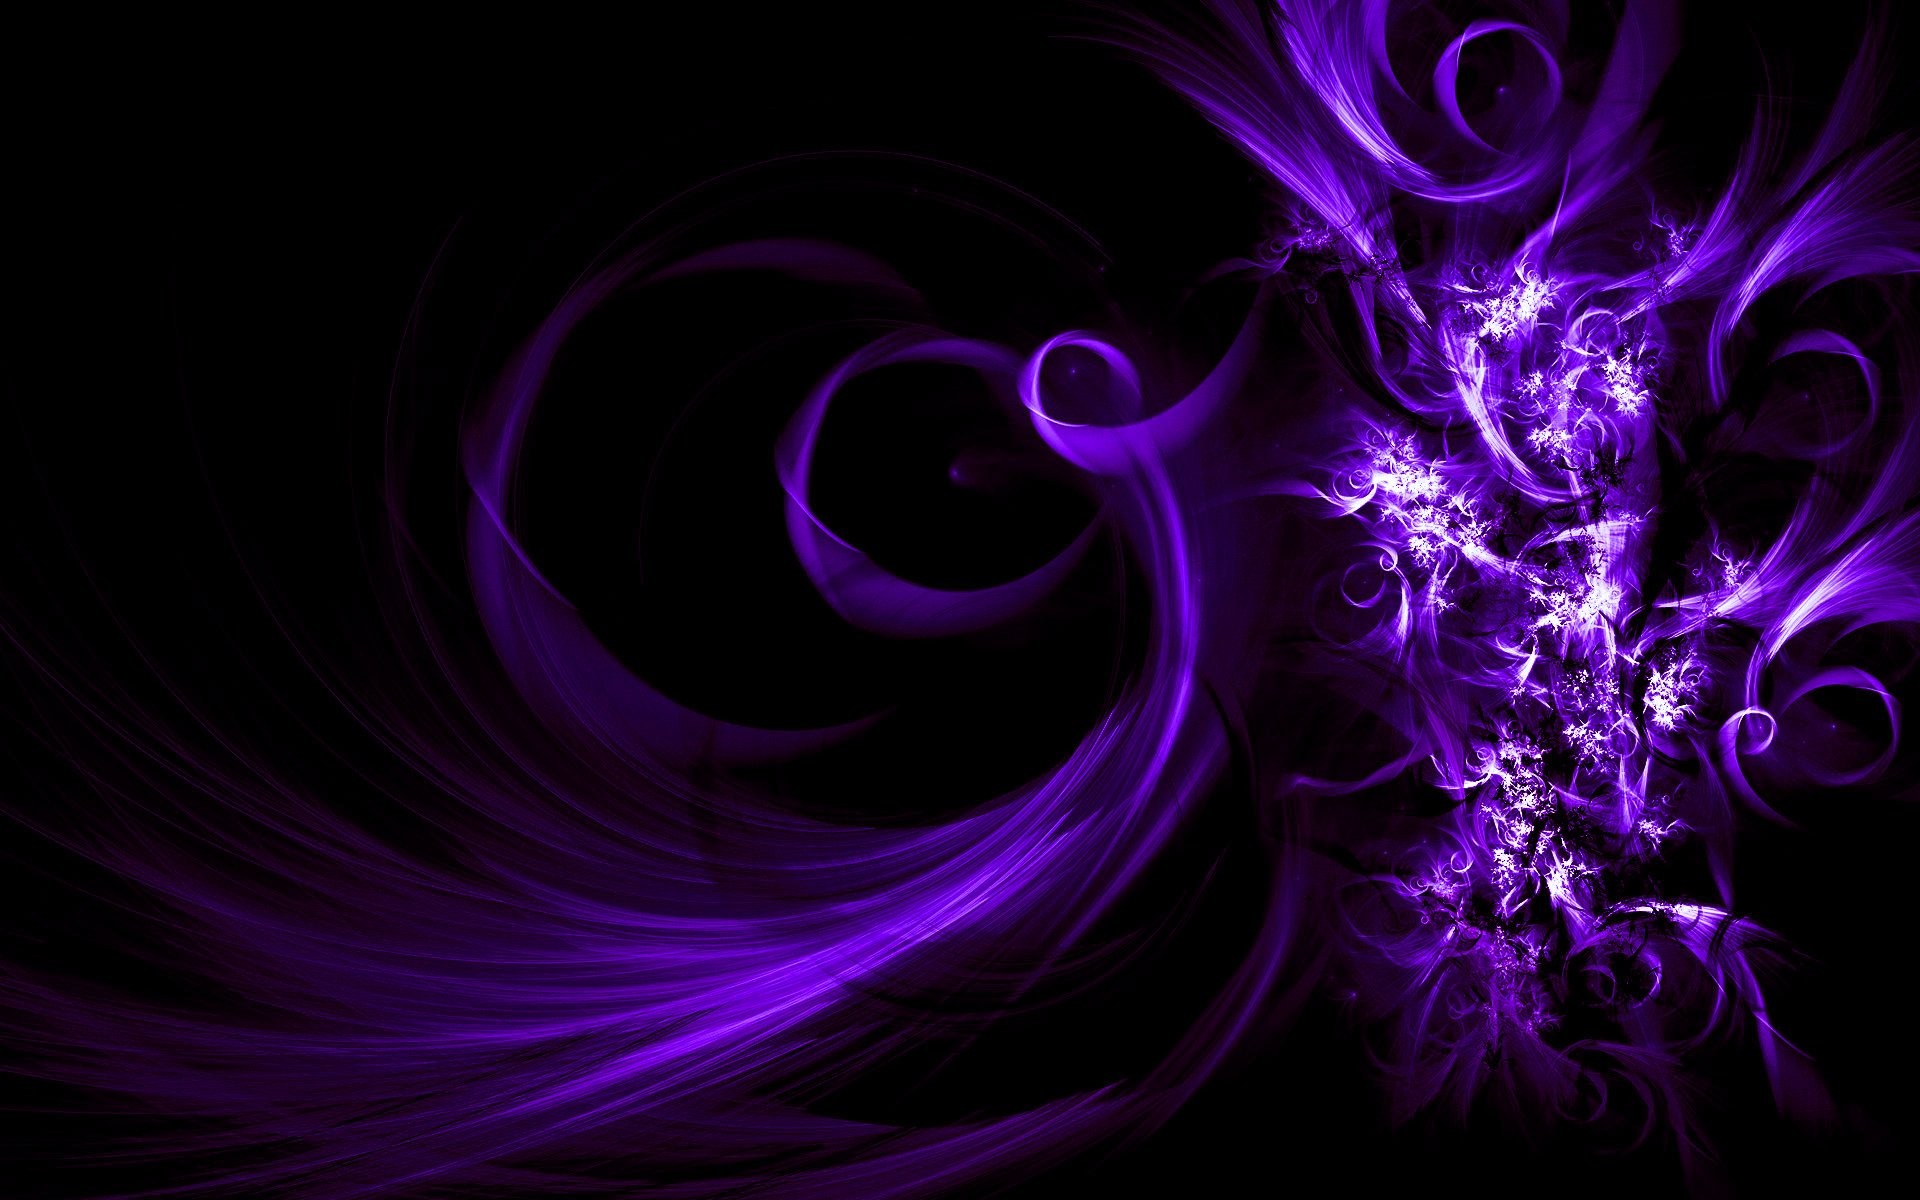 HD Wallpaper Background ID81939. Abstract Purple